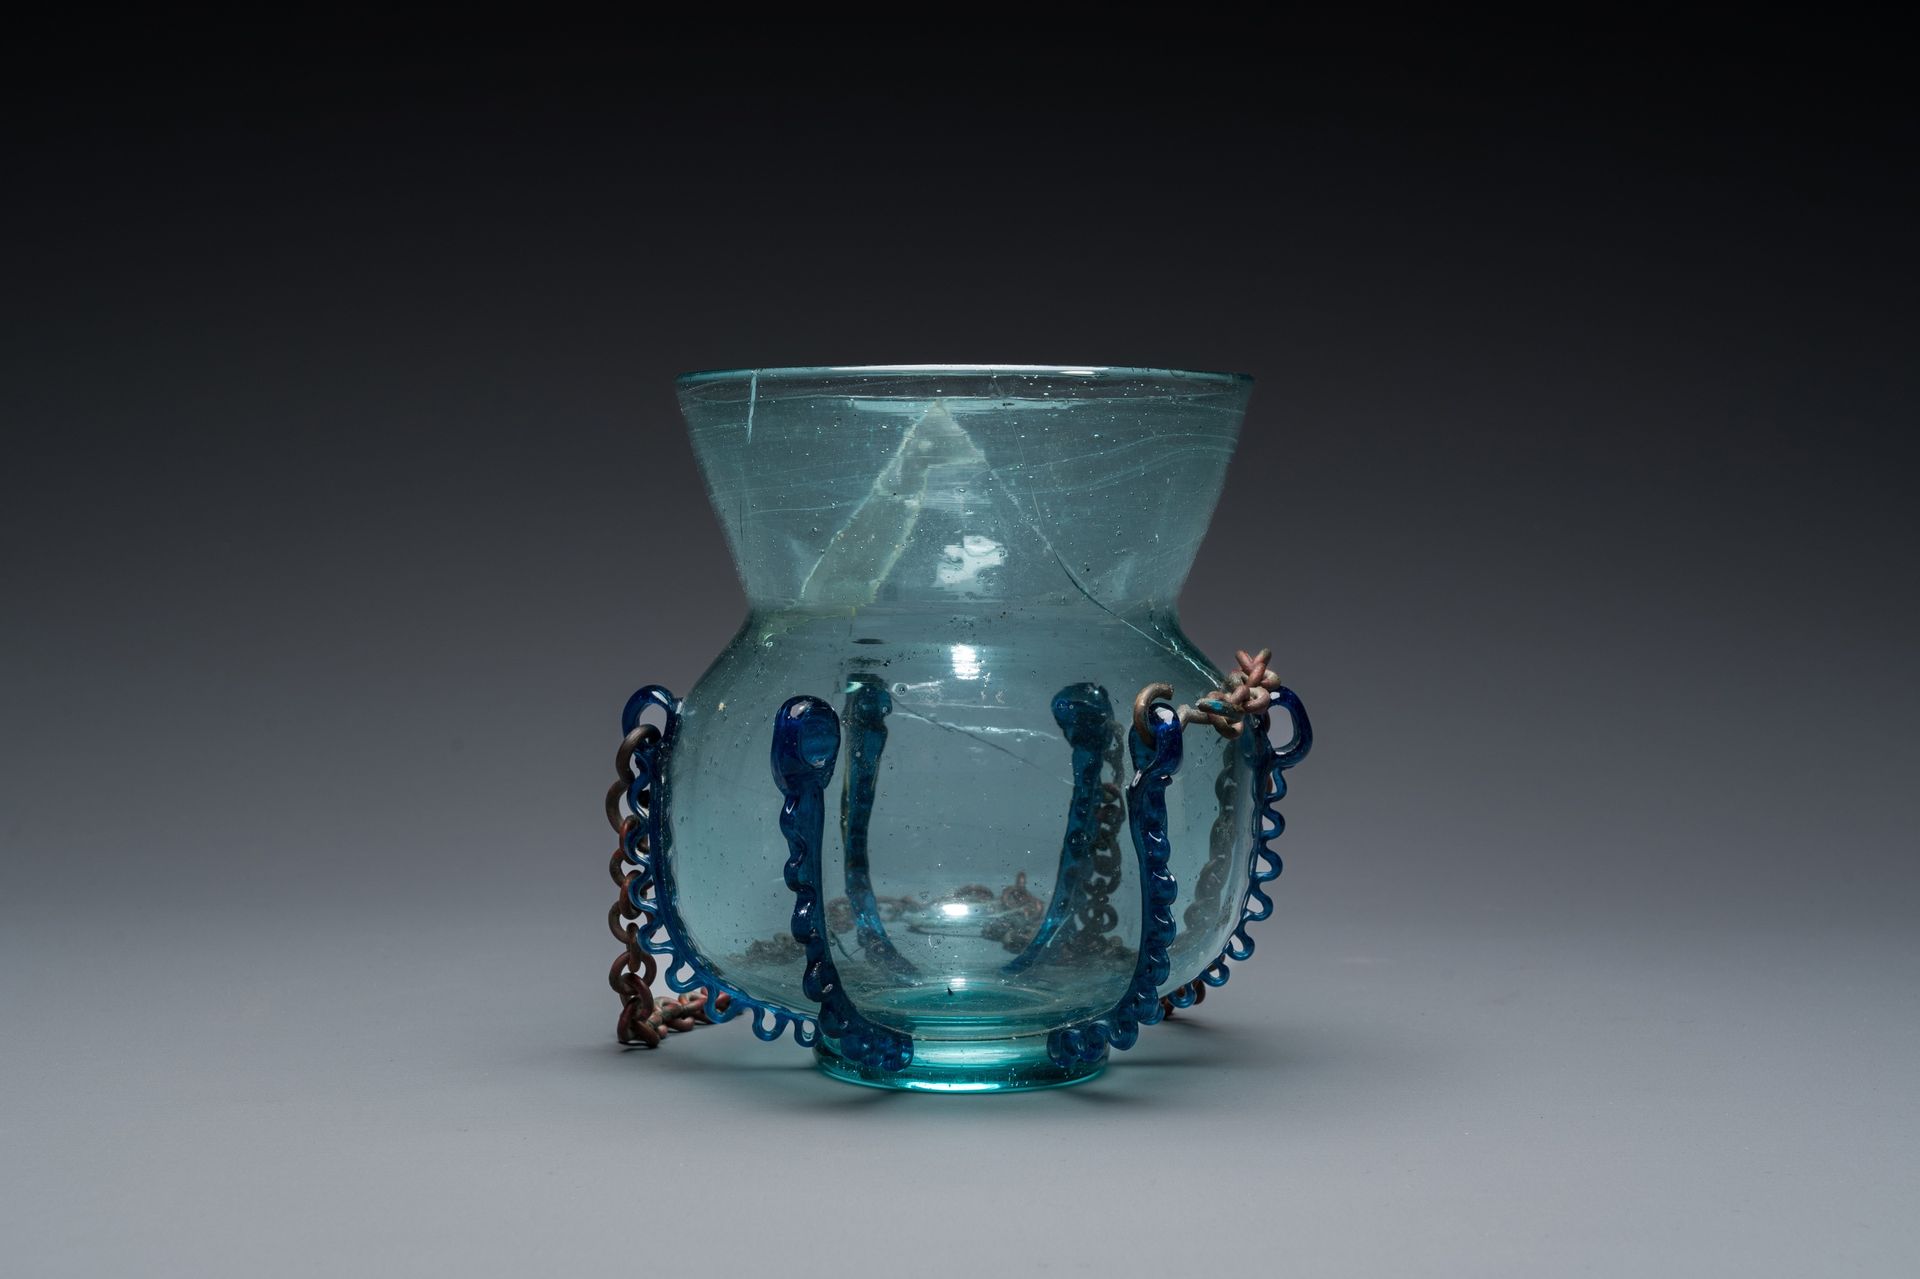 A light blue glass mosque lamp, Syria or Persia, 10th C. Full title: A light blu&hellip;